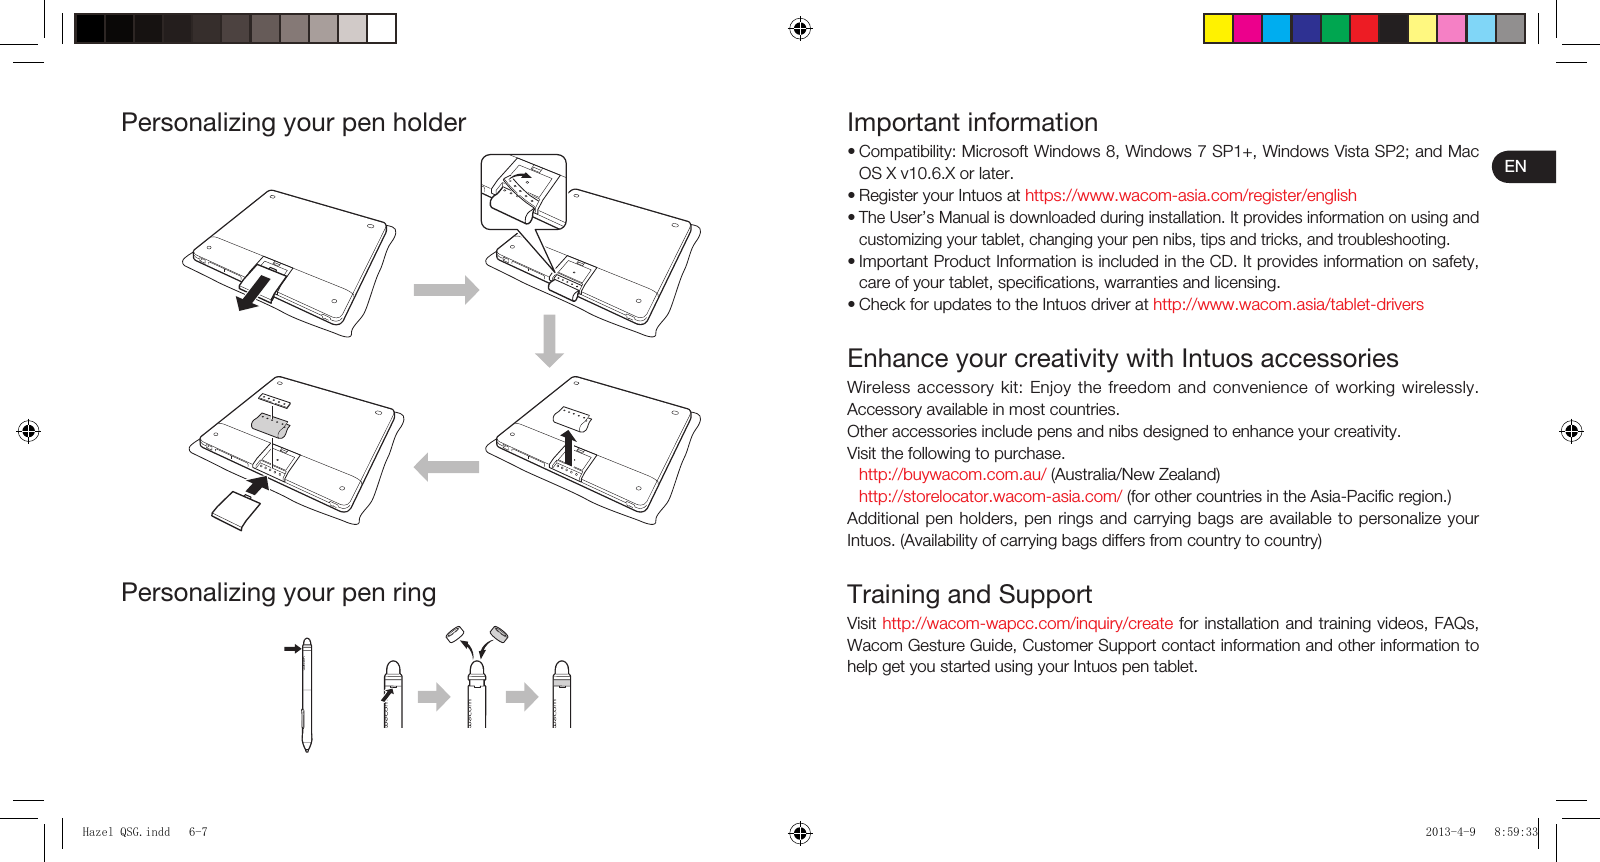 ENImportant informationCompatibility: Microsoft Windows 8, Windows 7 SP1+, Windows Vista SP2; and Mac OS X v10.6.X or later.Register your Intuos at https://www.wacom-asia.com/register/englishThe User’s Manual is downloaded during installation. It provides information on using and customizing your tablet, changing your pen nibs, tips and tricks, and troubleshooting.Important Product Information is included in the CD. It provides information on safety, care of your tablet, speciﬁ cations, warranties and licensing.Check for updates to the Intuos driver at http://www.wacom.asia/tablet-driversEnhance your creativity with Intuos accessoriesWireless accessory kit: Enjoy the freedom and convenience of working wirelessly. Accessory available in most countries.Other accessories include pens and nibs designed to enhance your creativity.Visit the following to purchase.http://buywacom.com.au/ (Australia/New Zealand)http://storelocator.wacom-asia.com/ (for other countries in the Asia-Paciﬁ c region.)Additional pen holders, pen rings and carrying bags are available to personalize your Intuos. (Availability of carrying bags differs from country to country)Training and SupportVisit http://wacom-wapcc.com/inquiry/create for installation and training videos, FAQs, Wacom Gesture Guide, Customer Support contact information and other information to help get you started using your Intuos pen tablet.•••••Personalizing your pen holderPersonalizing your pen ringHazel QSG.indd   6-7Hazel QSG.indd   6-7 2013-4-9   8:59:332013-4-9   8:59:33